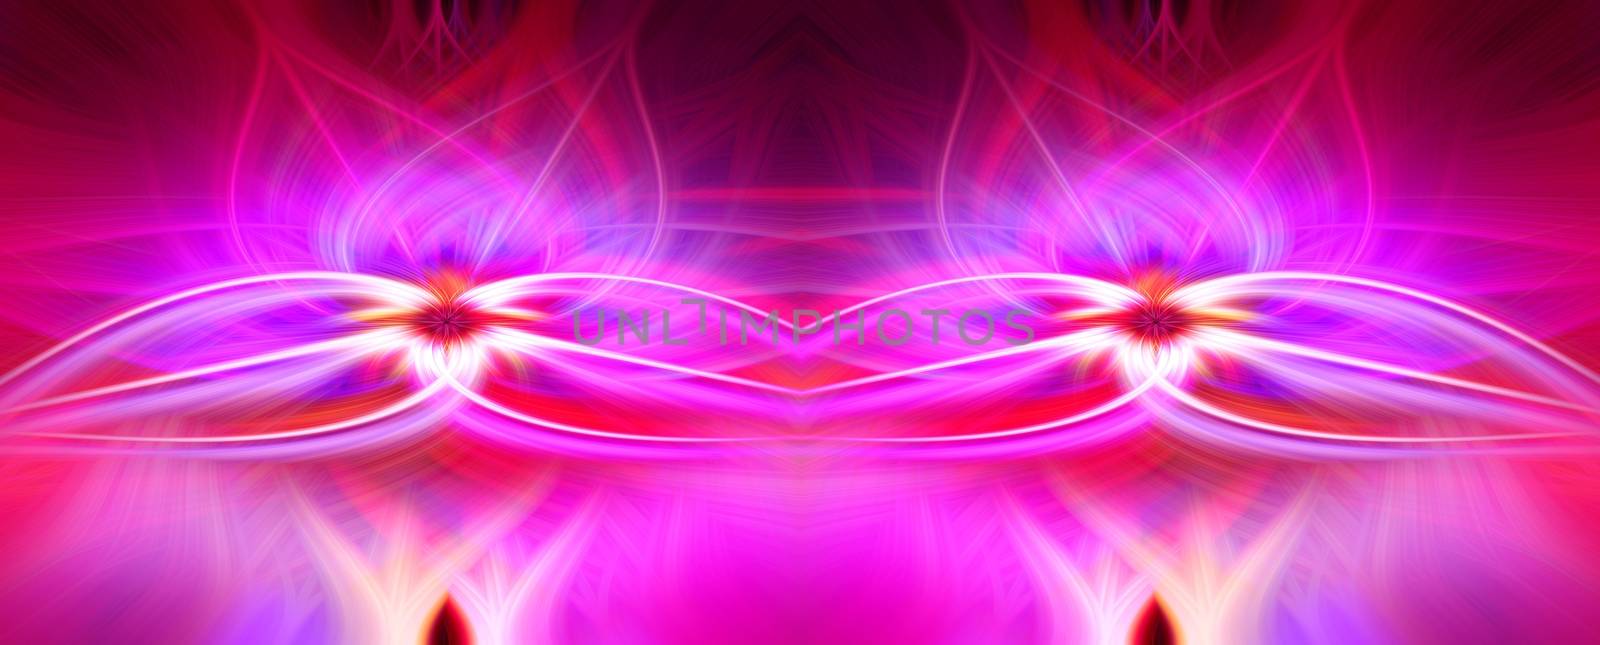 Beautiful abstract intertwined 3d fibers forming a shape of sparkle, flame, flower, interlinked hearts. Pink, blue, maroon, orange, and purple colors. Illustration. Banner and panorama size